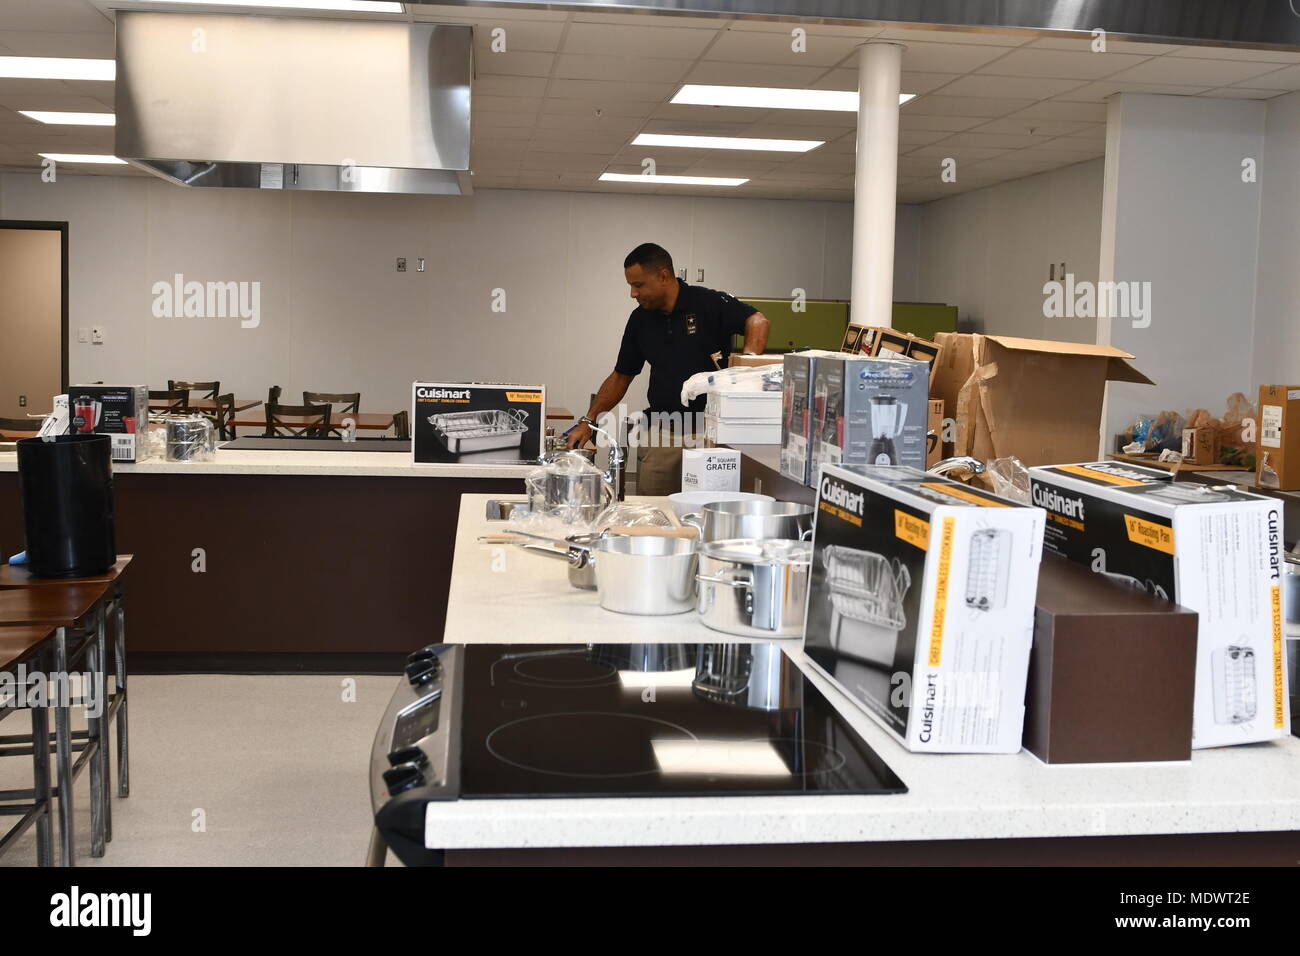 Sgt. 1st Class Raphael B. Bonair, Executive Aide, U.S. Army North (Fifth Army) sets up and prepares the teaching kitchen in the Vogel Resiliency Center. The Vogel Resiliency Center is a project that’s going to bring together eight entities of resiliency services into one location. This facility is unique to fort Sam Houston and unique in the Army. The grand opening of the Vogel Resiliency Center is scheduled for January 5, 2018 at 2p.m., building 367 located at the corner of Stanley and Reynolds. It will be the first military event to kick off the City of San Antonio 300th Anniversary. Stock Photo